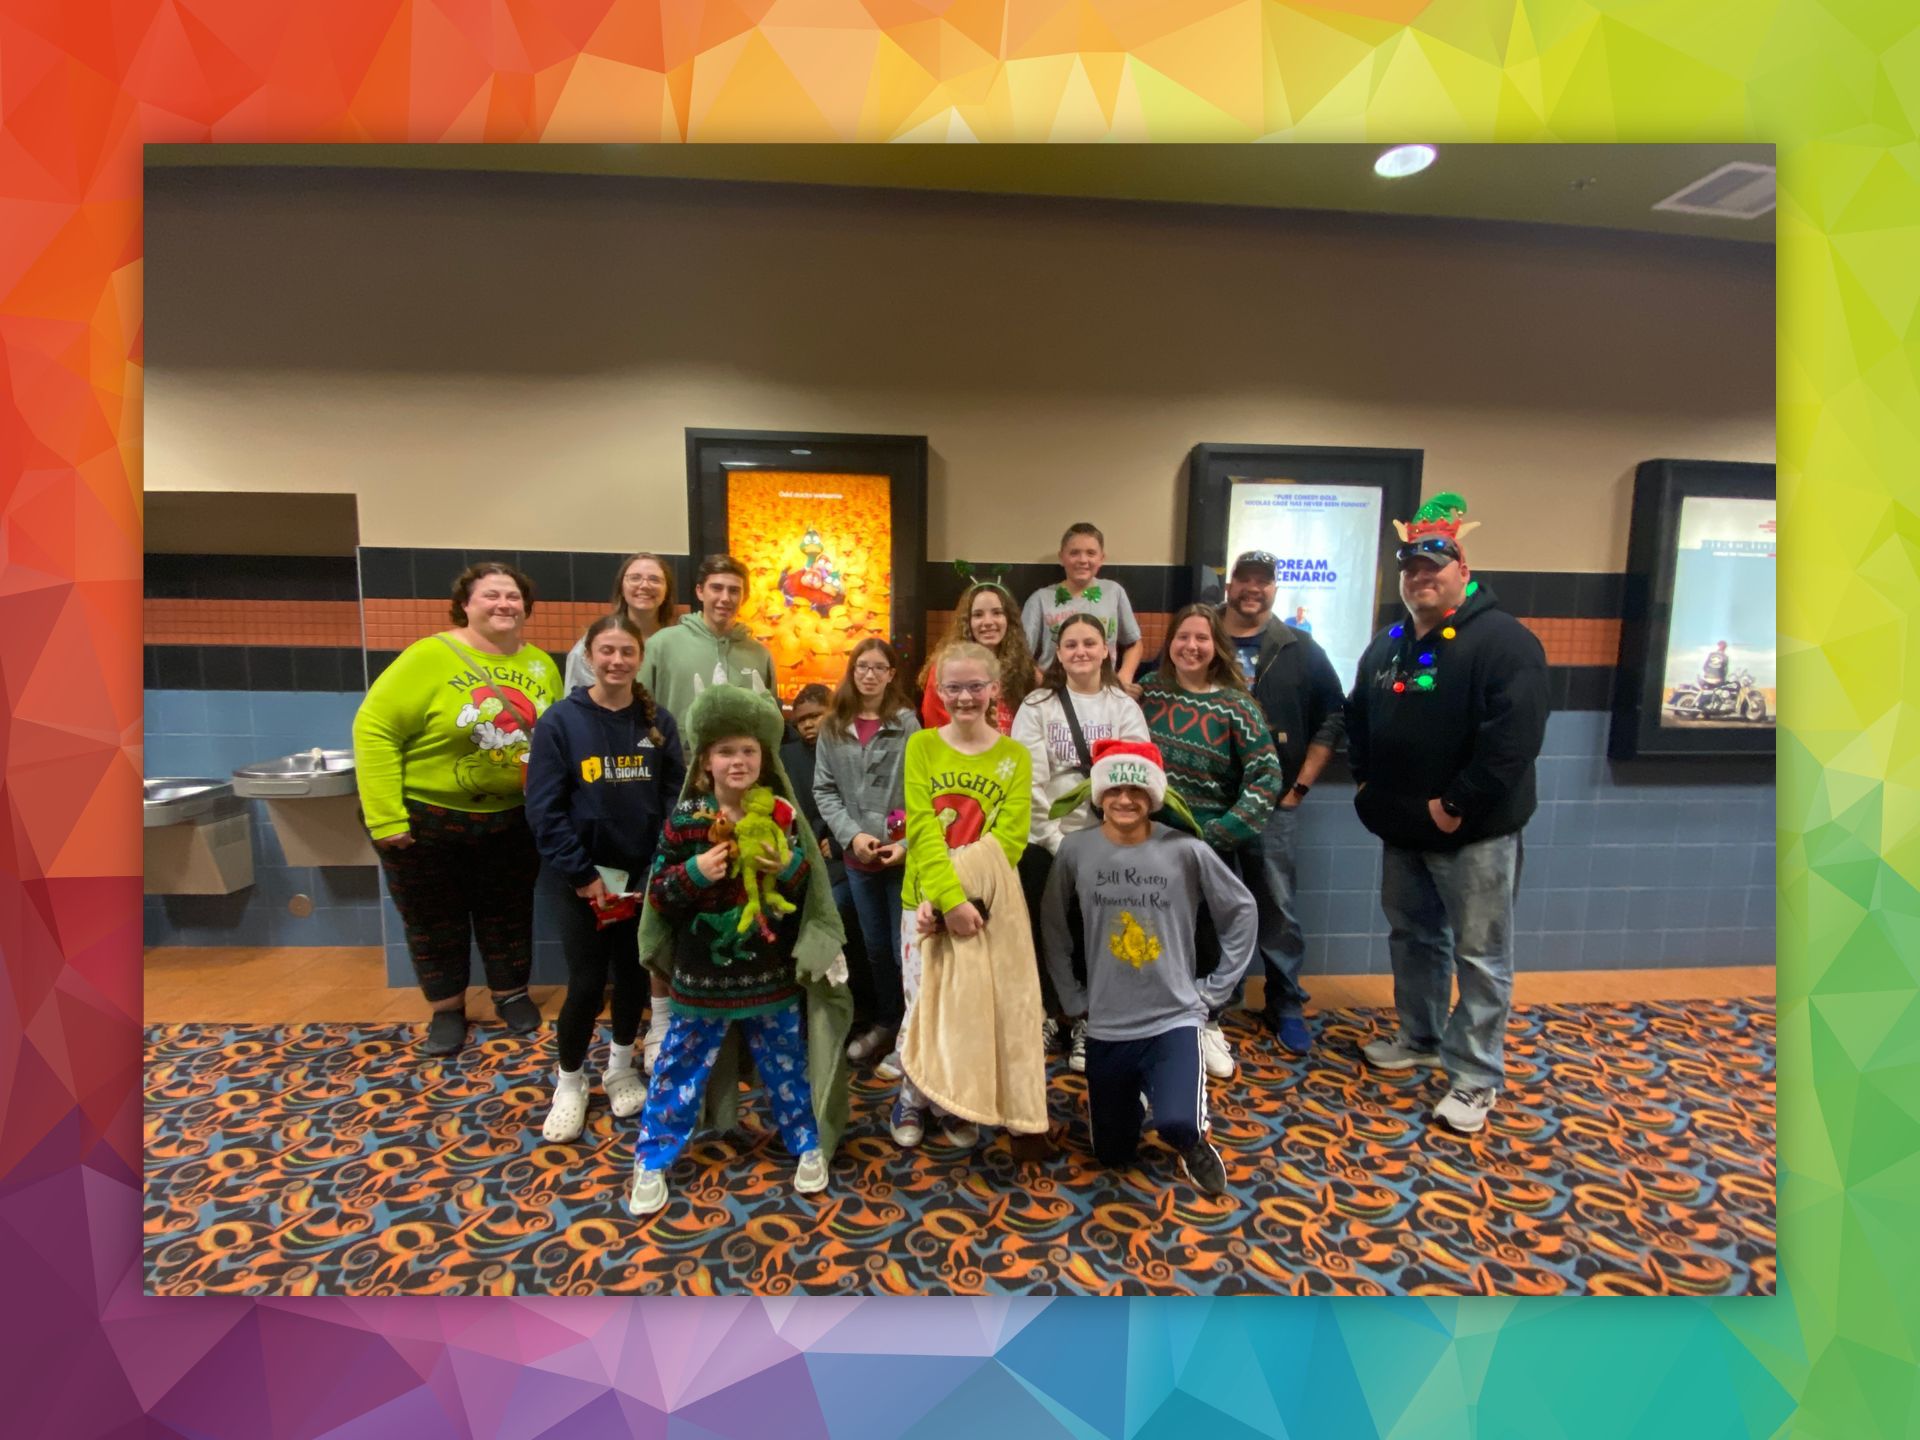 Youth Group members enjoying a movie event at a local theater.